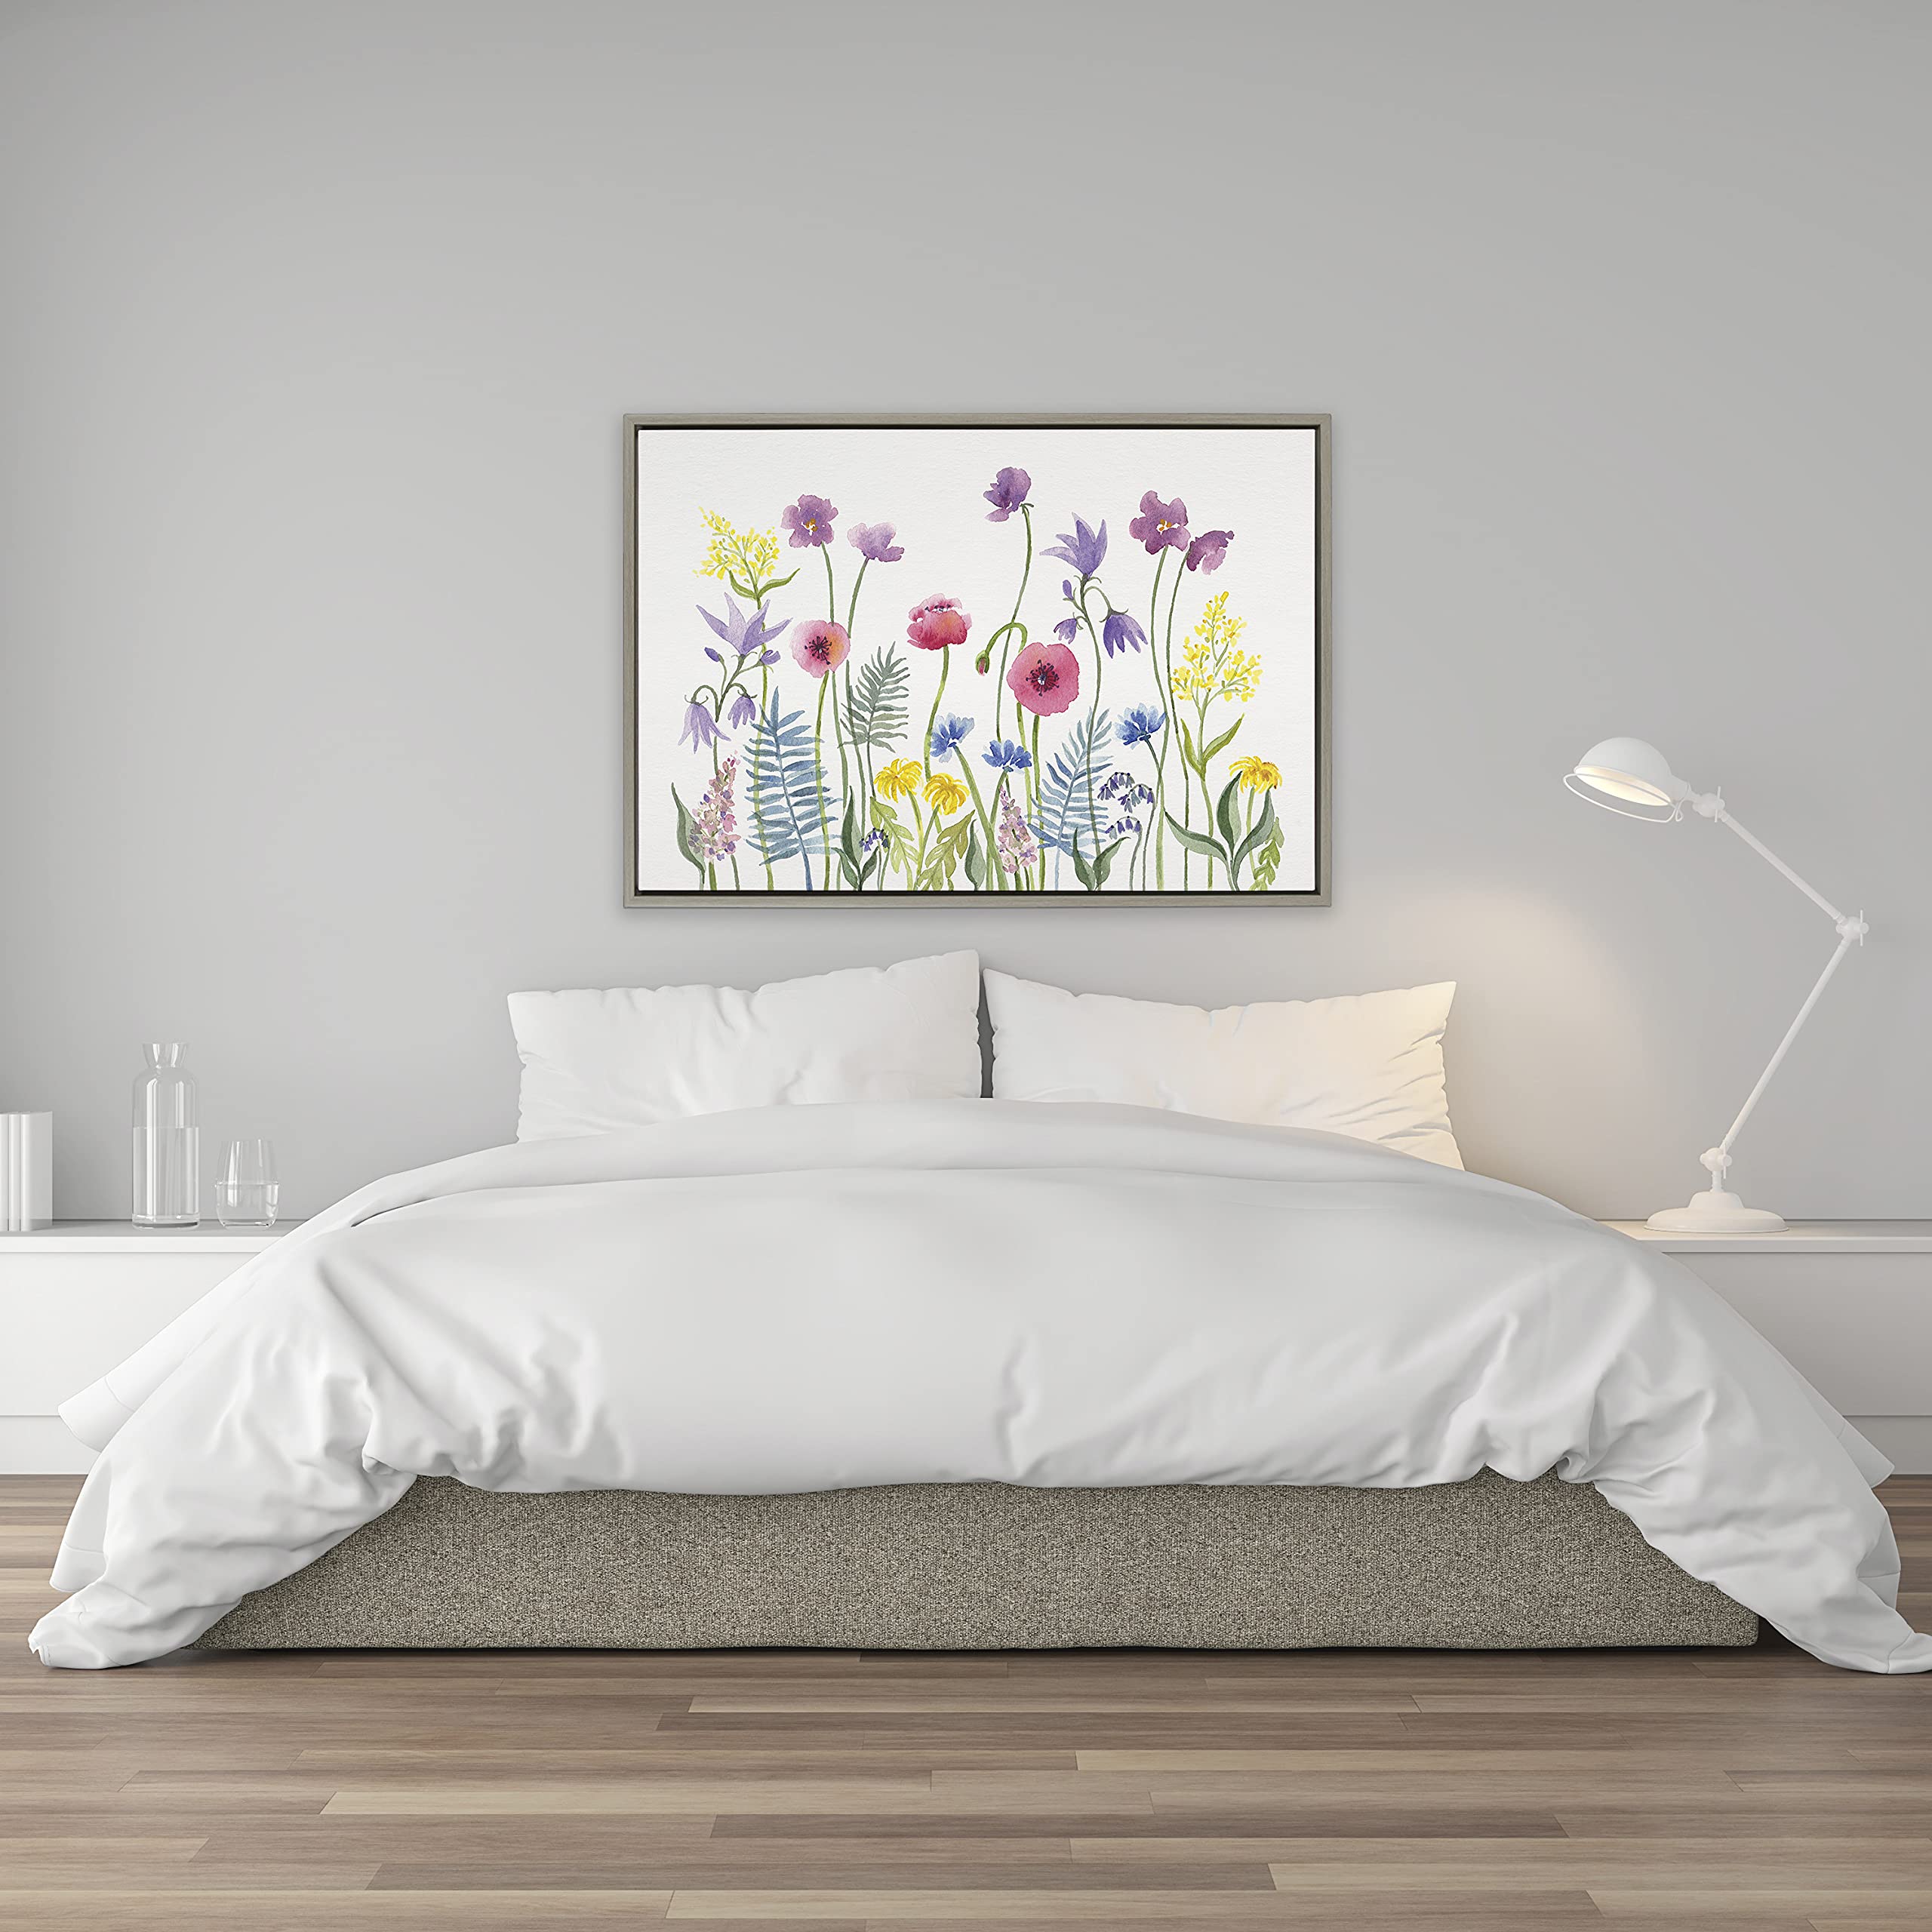 Kate and Laurel Sylvie Wildflorals Framed Canvas Wall Art by Patricia Shaw, 23x33 Gray, Decorative Flower At for Wall